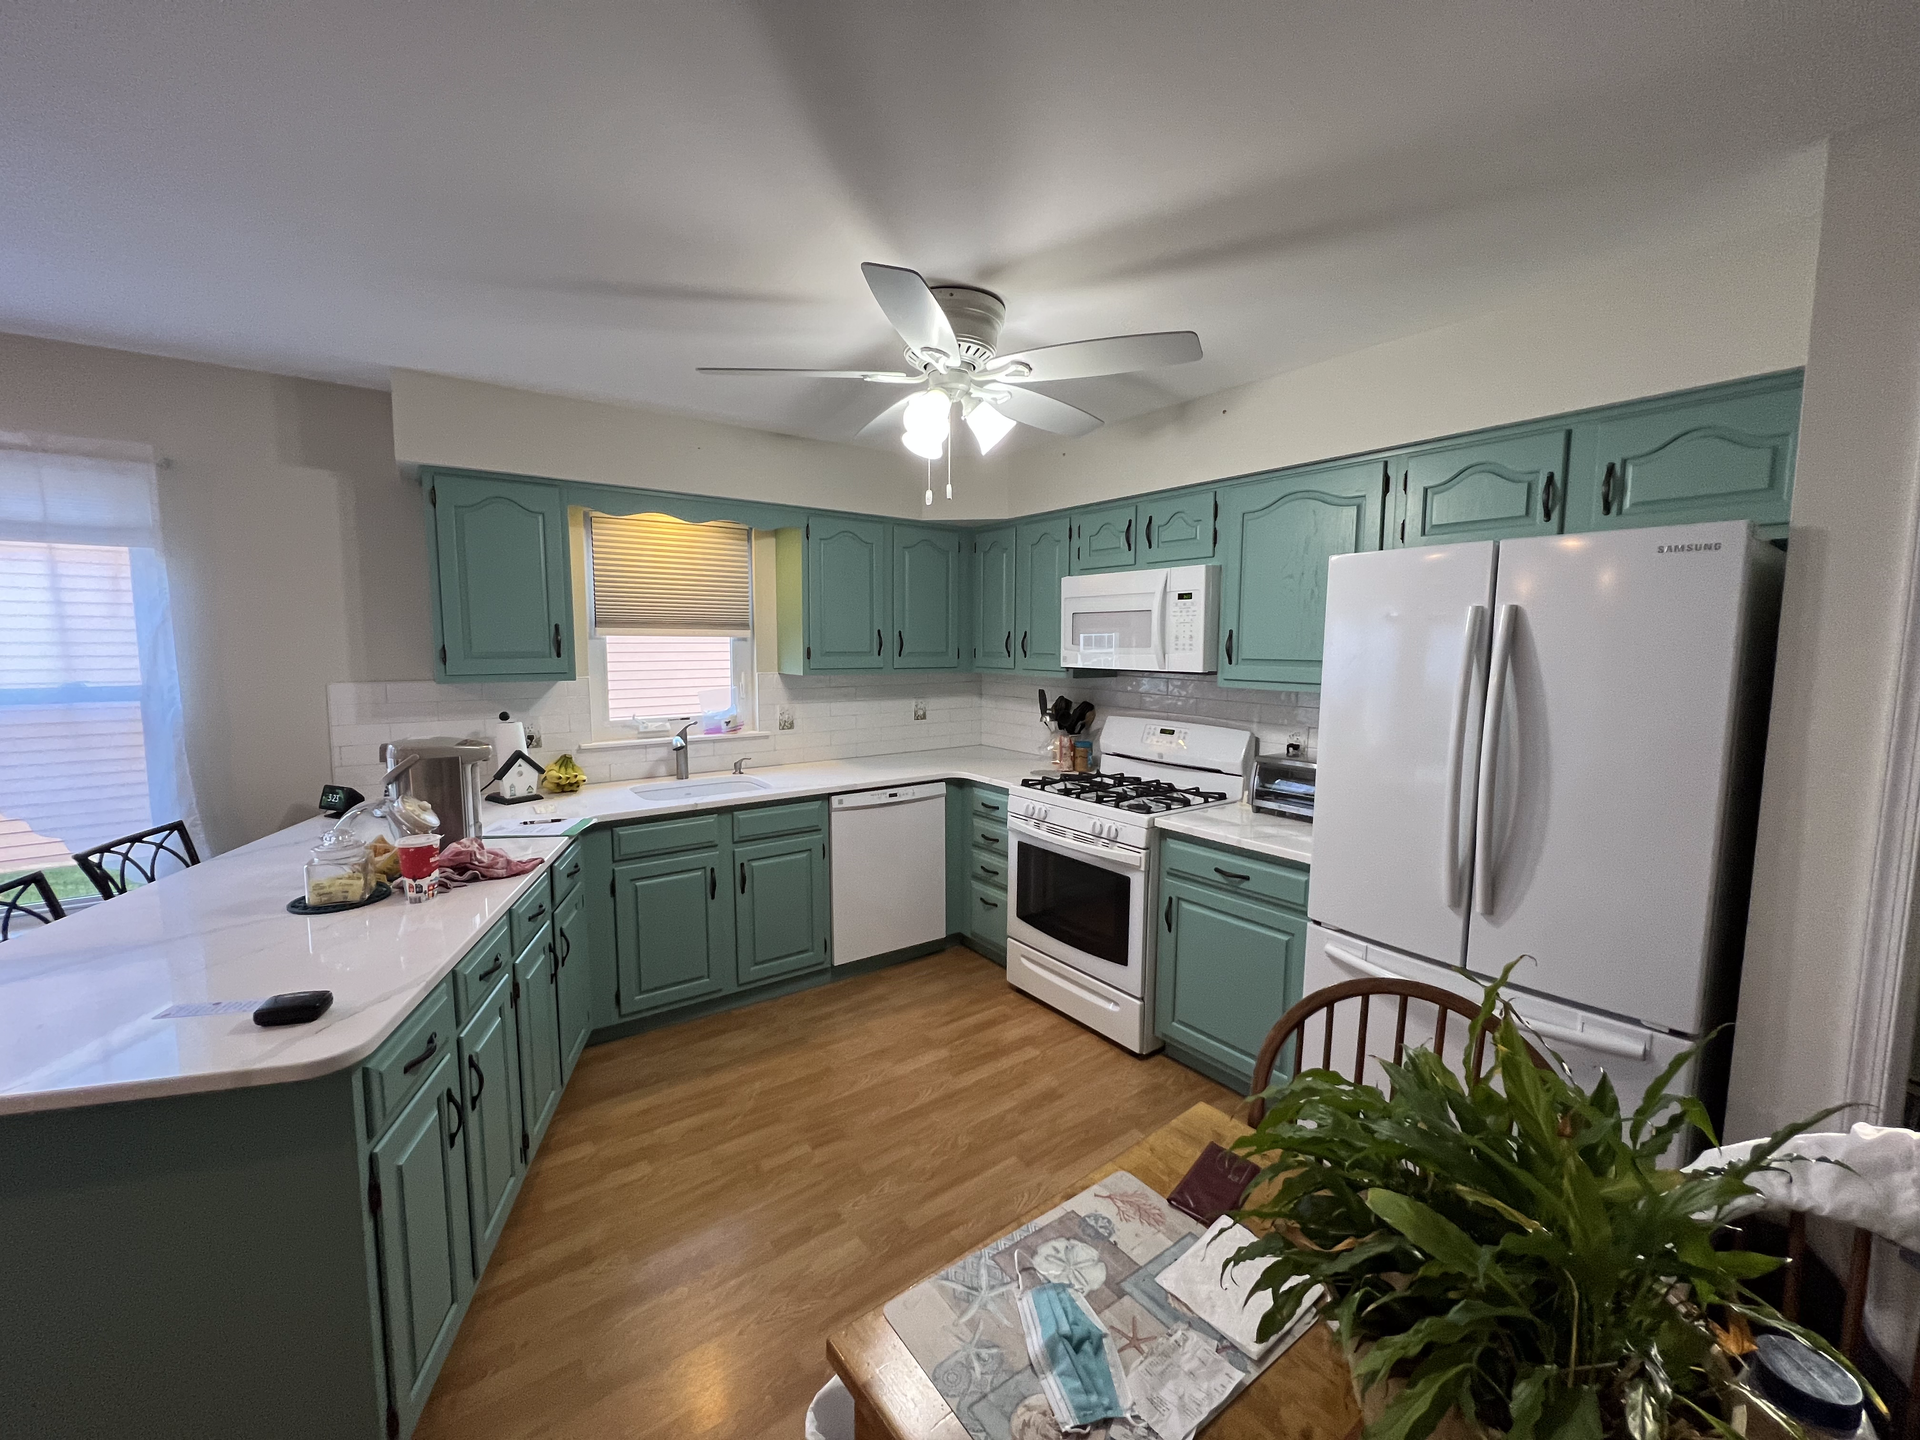 A refinished seafoam green beach kitchen we completed in New Jersey